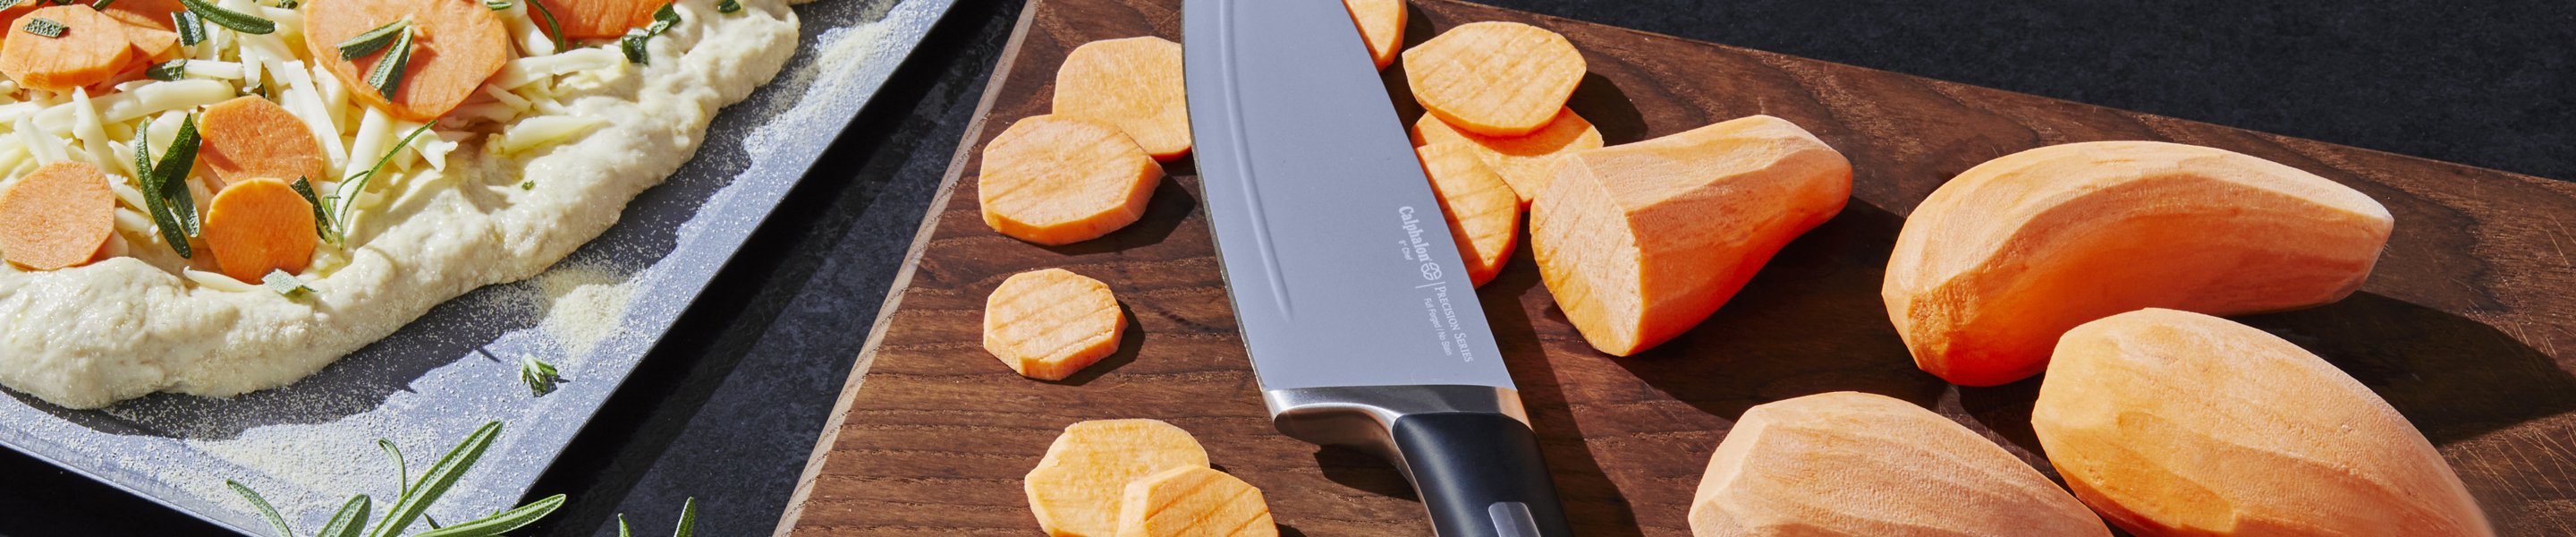 Lifestyle of chef knife on a cutting board